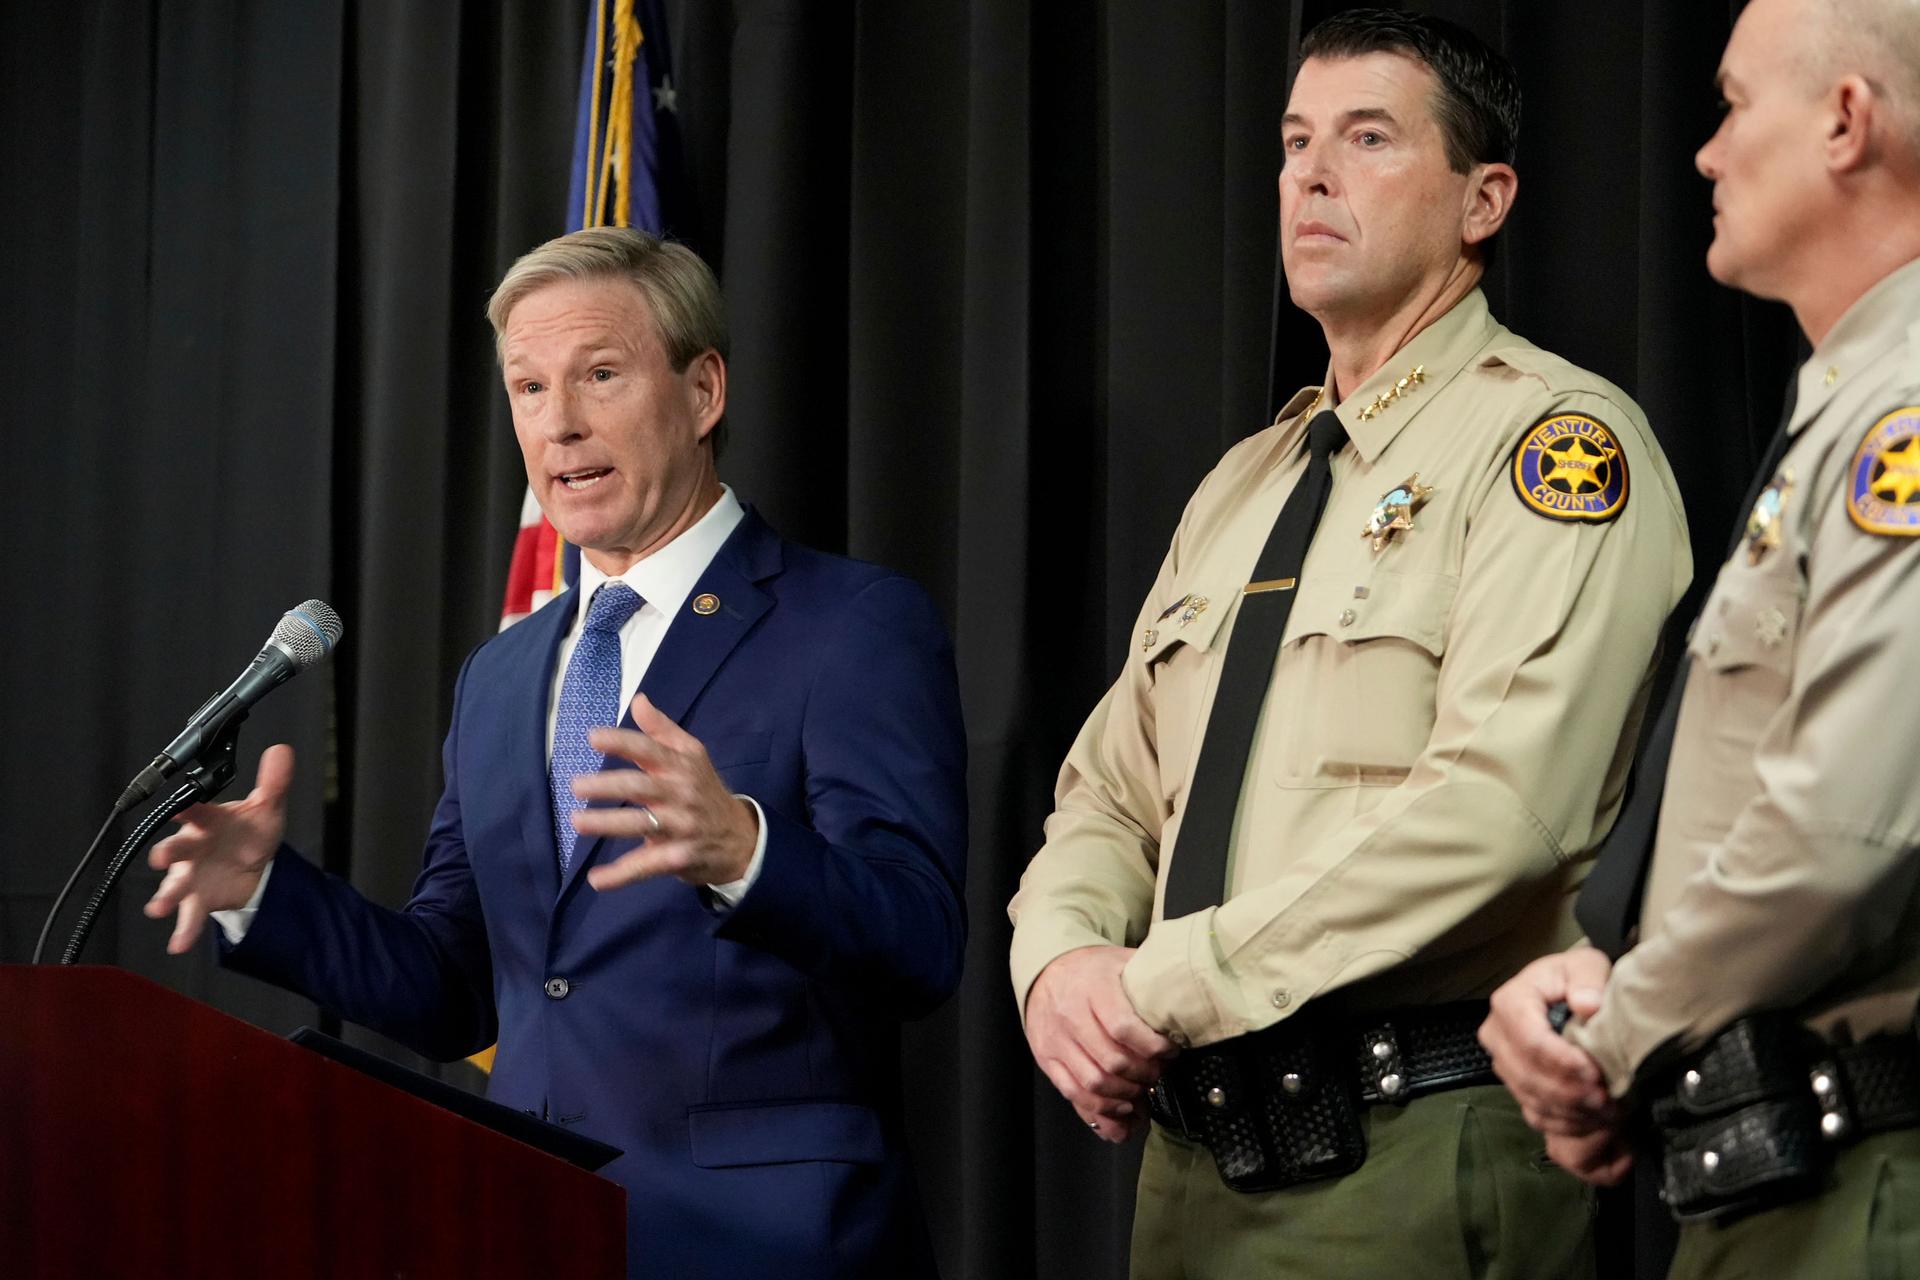 (L–R) Ventura County District Attorney Erik Nasarenko, Ventura County Sheriff Jim Fryhoff, and Thousand Oaks Chief of Police Jeremy Paris answer questions during a news conference in Thousand Oaks, Calif., on Nov. 17, 2023, concerning the death of Paul Kessler. (Juan Carlo/The Ventura County Star via AP)